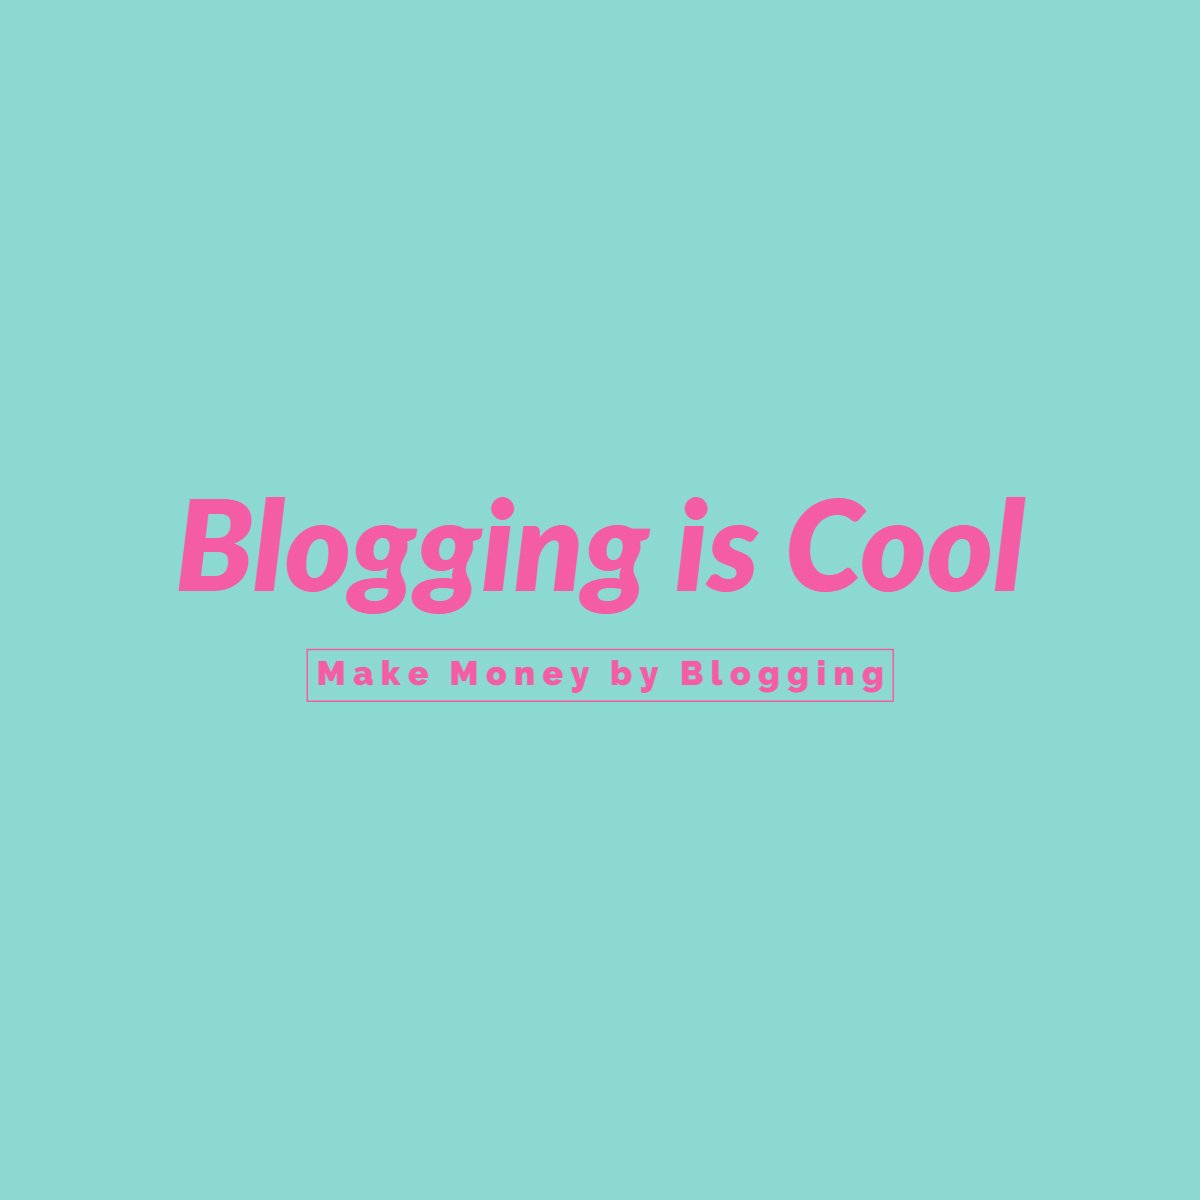 Bloggingiscool.com How to Create an SEO-Friendly URL Structure for Your Blog Posts